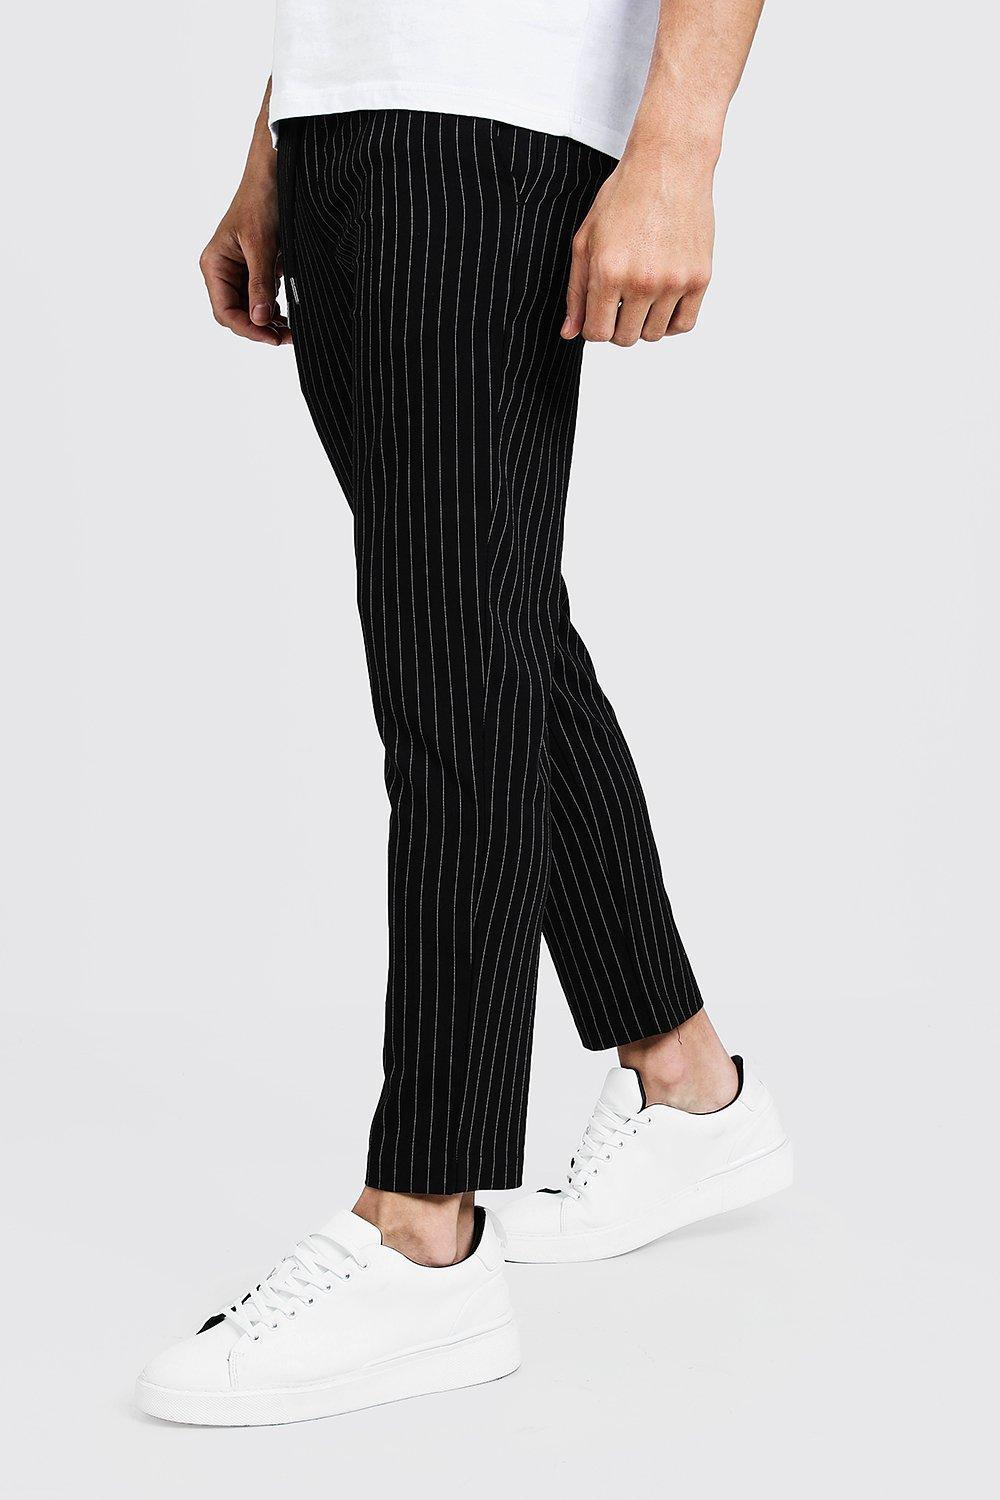 BoohooMAN Darted Pinstripe Smart Jogger Trouser in Black for Men - Lyst